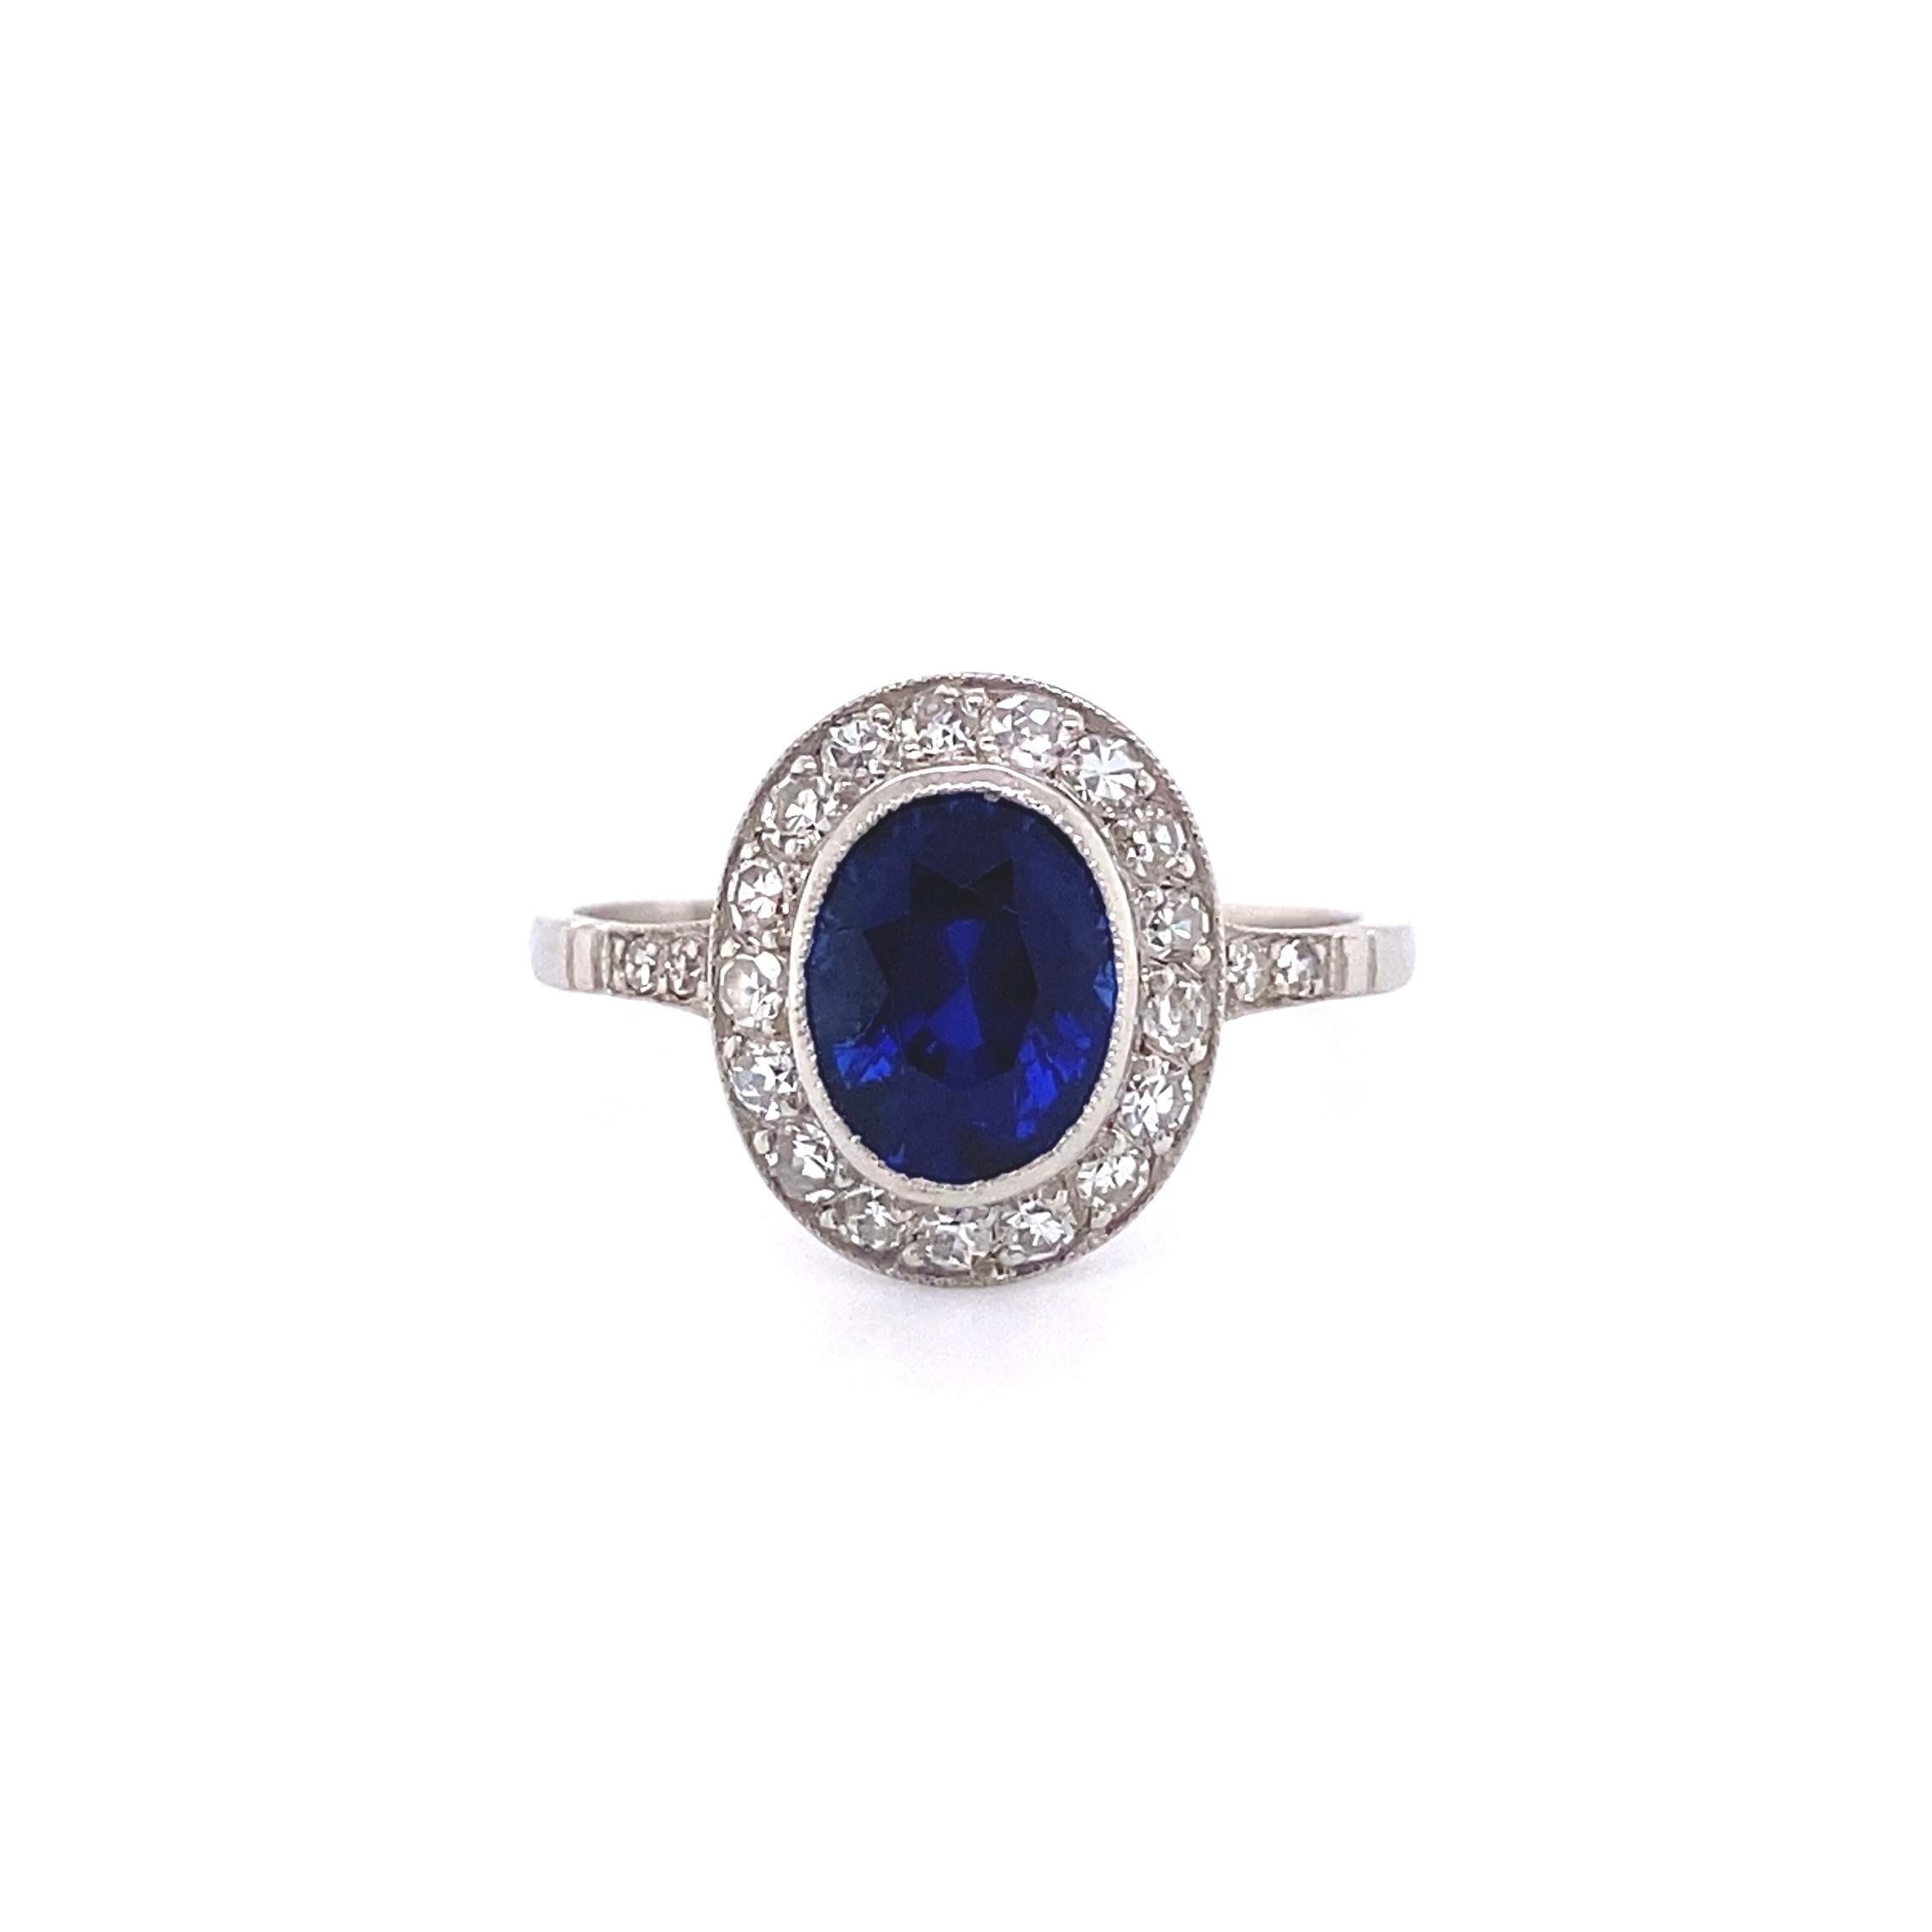 Vintage Show Stopper 2.51 Carat No Heat Ceylon Sapphire Diamond Platinum Ring In Excellent Condition For Sale In Montreal, QC